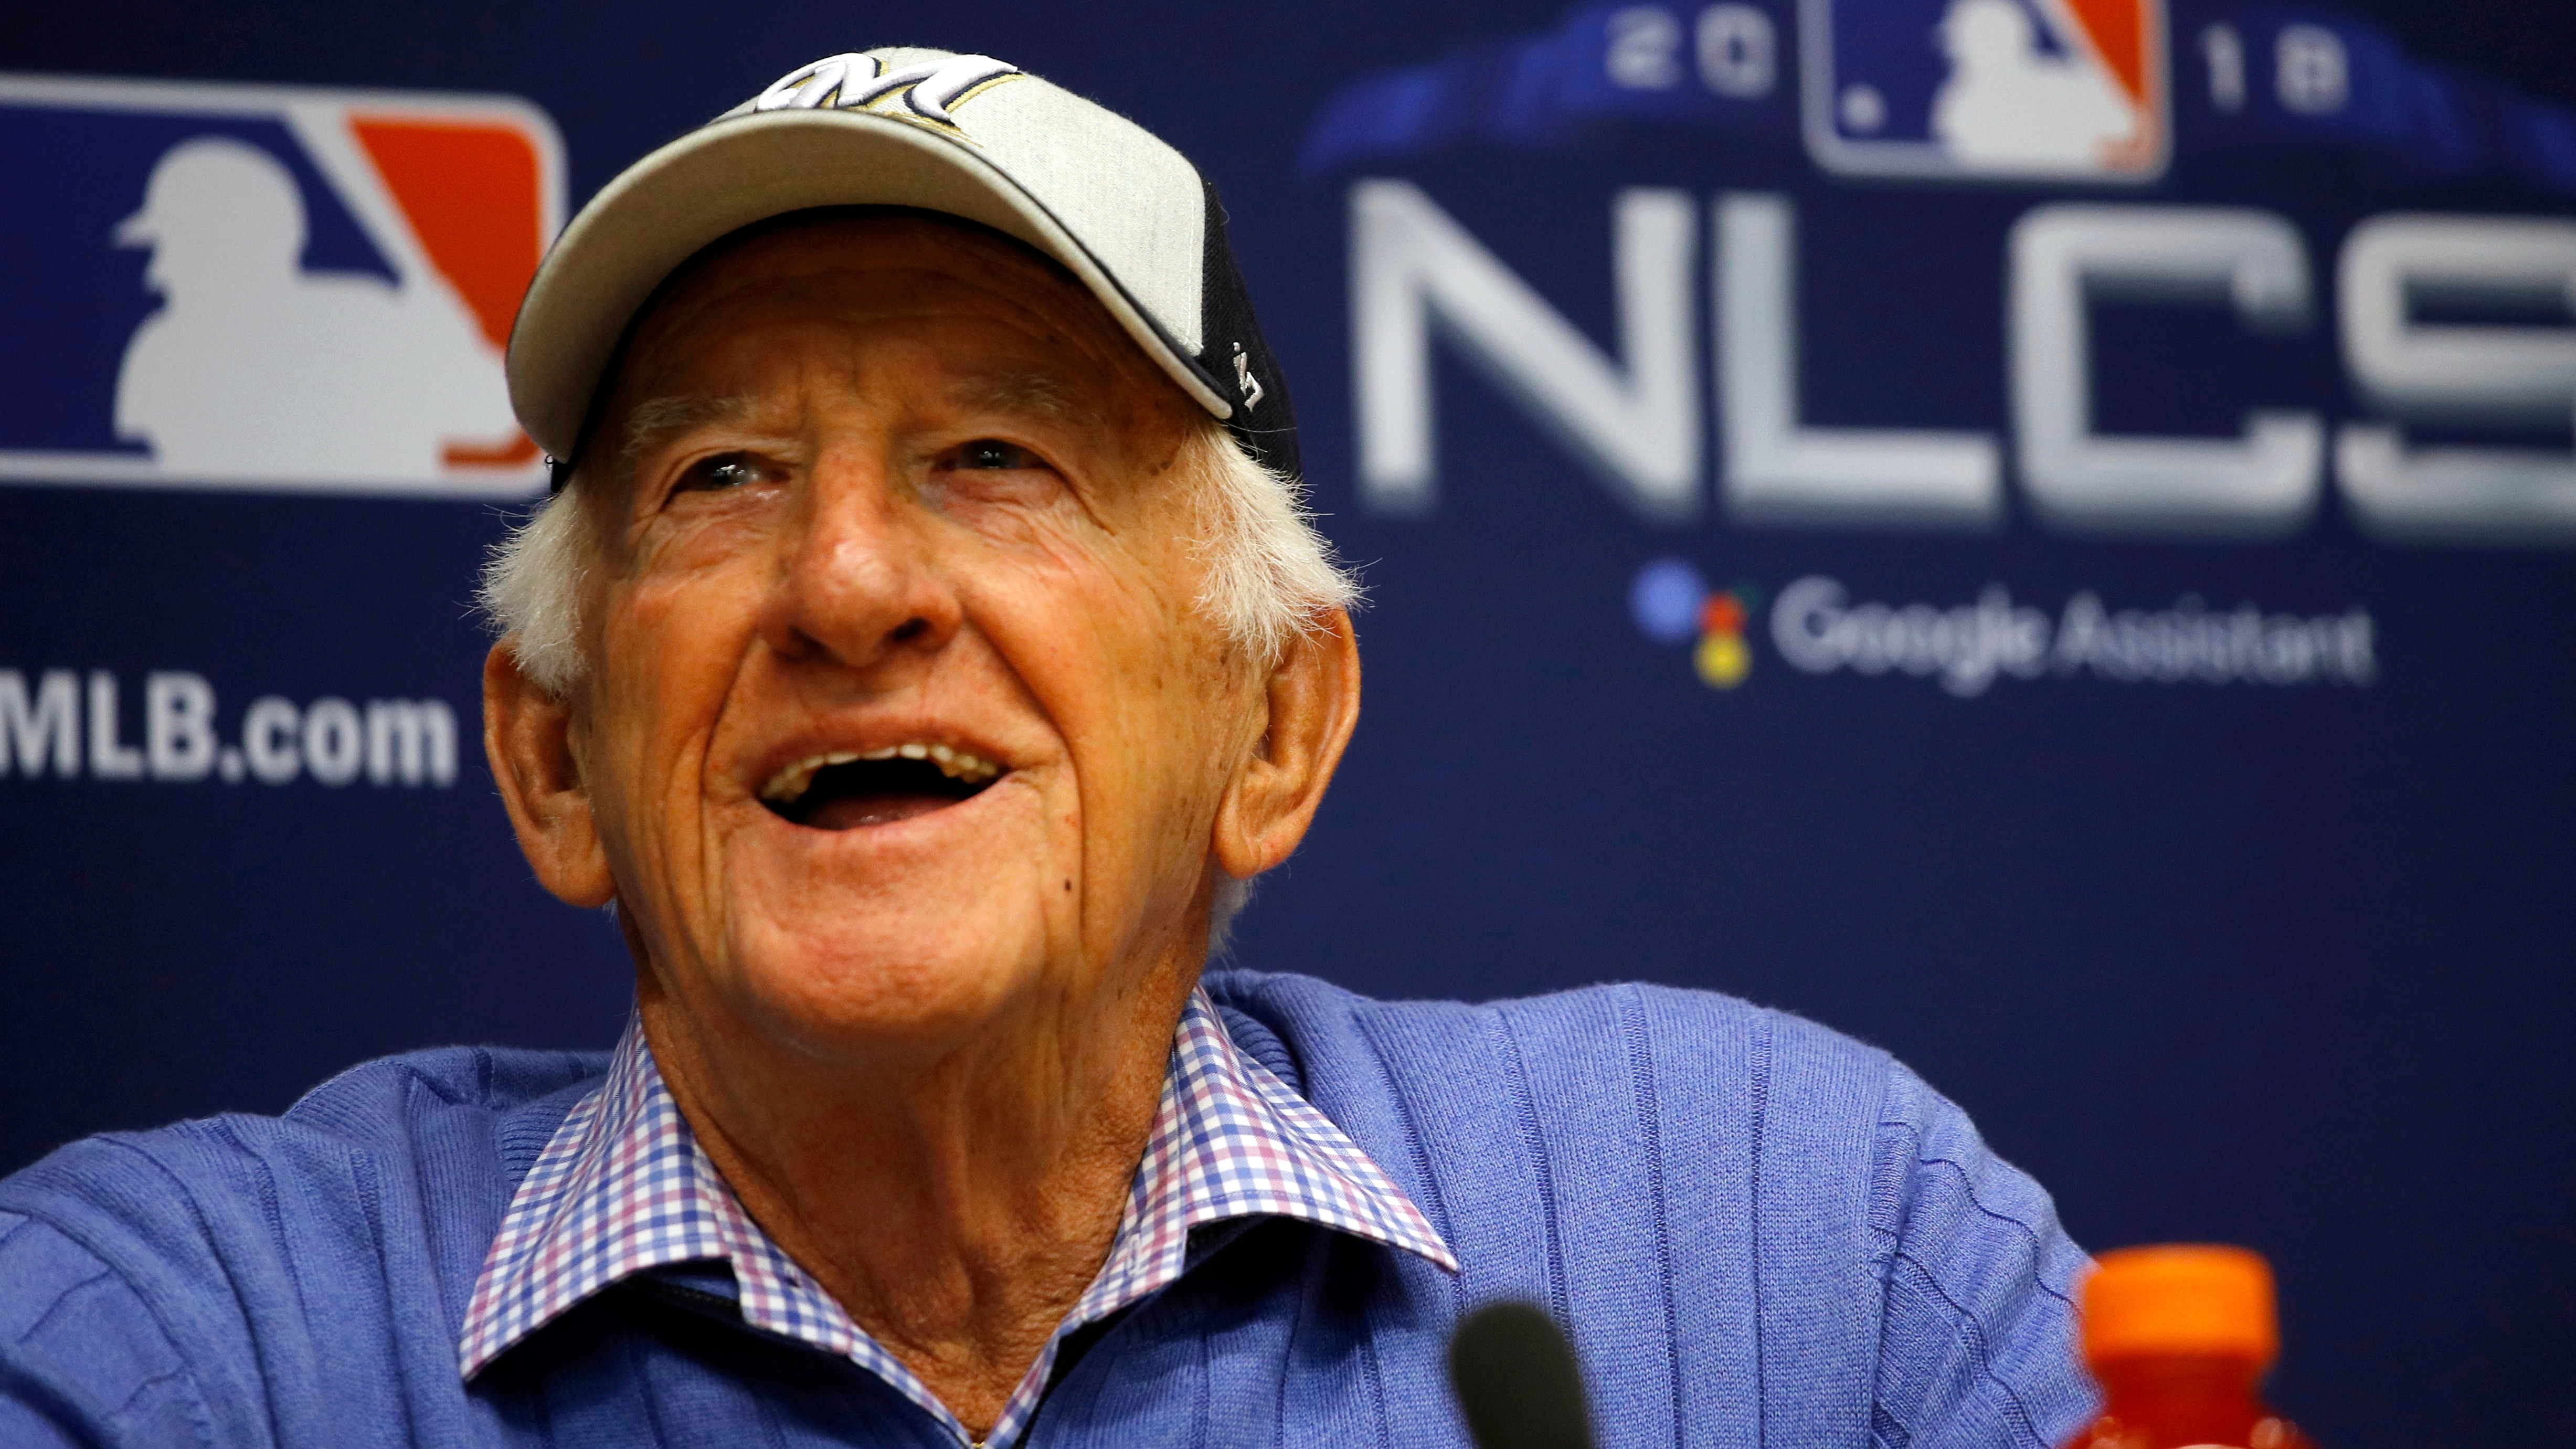 At 86 years old, it's 'totally new' for Bob Uecker in 50th season